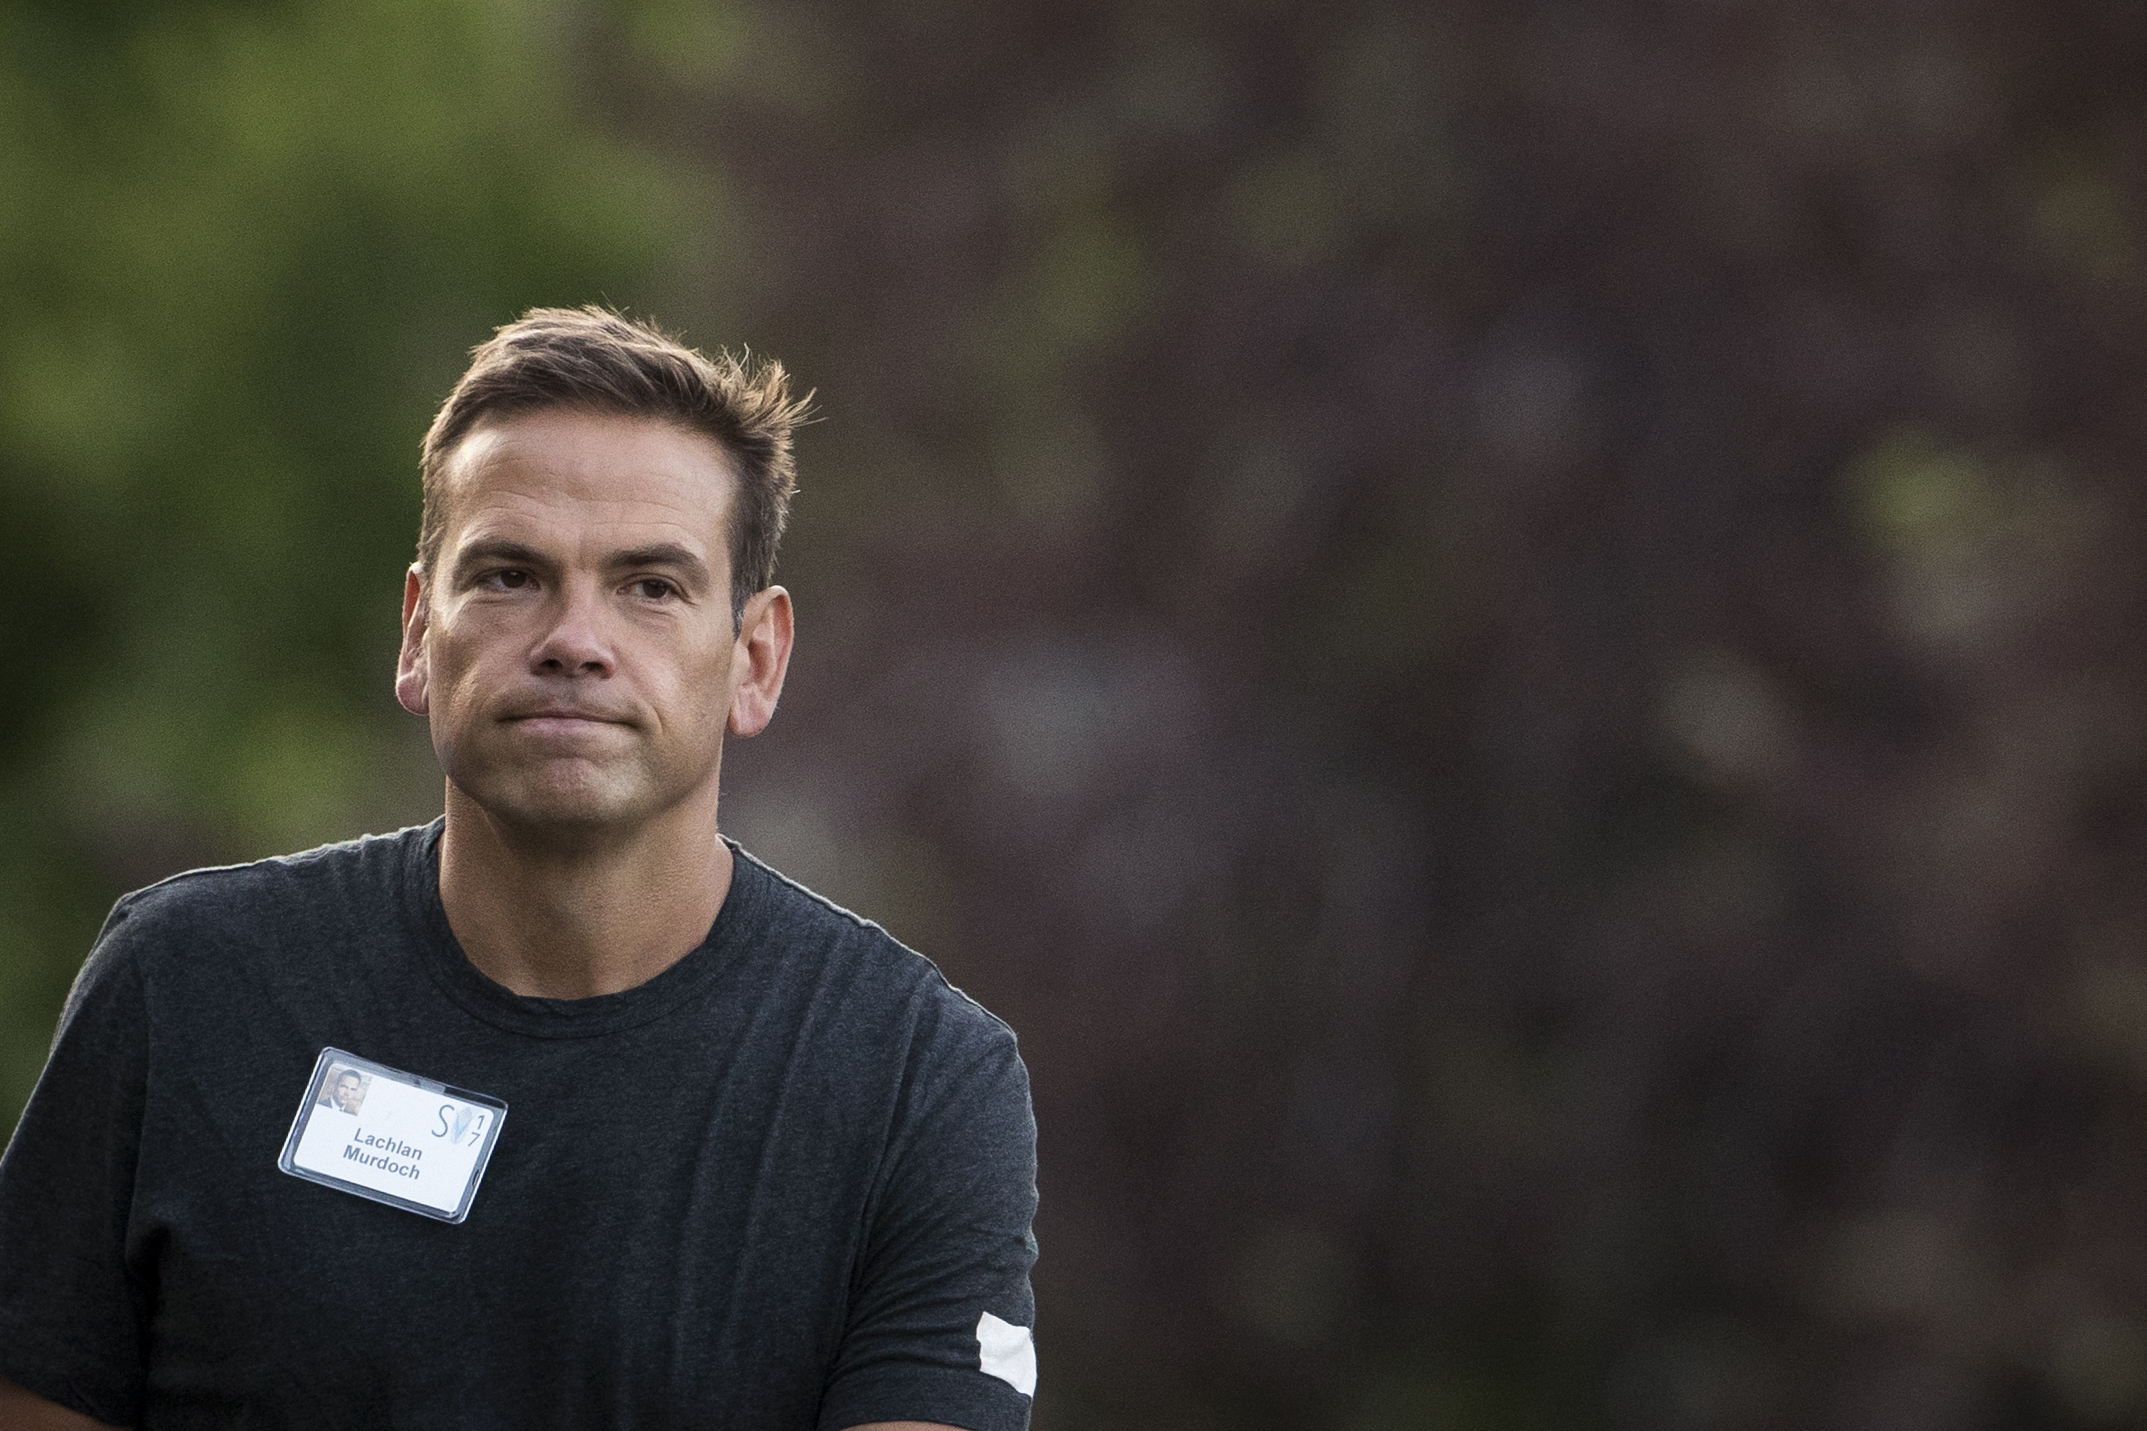 Lachlan Murdoch S Political Views Could See Fox News Radically Change